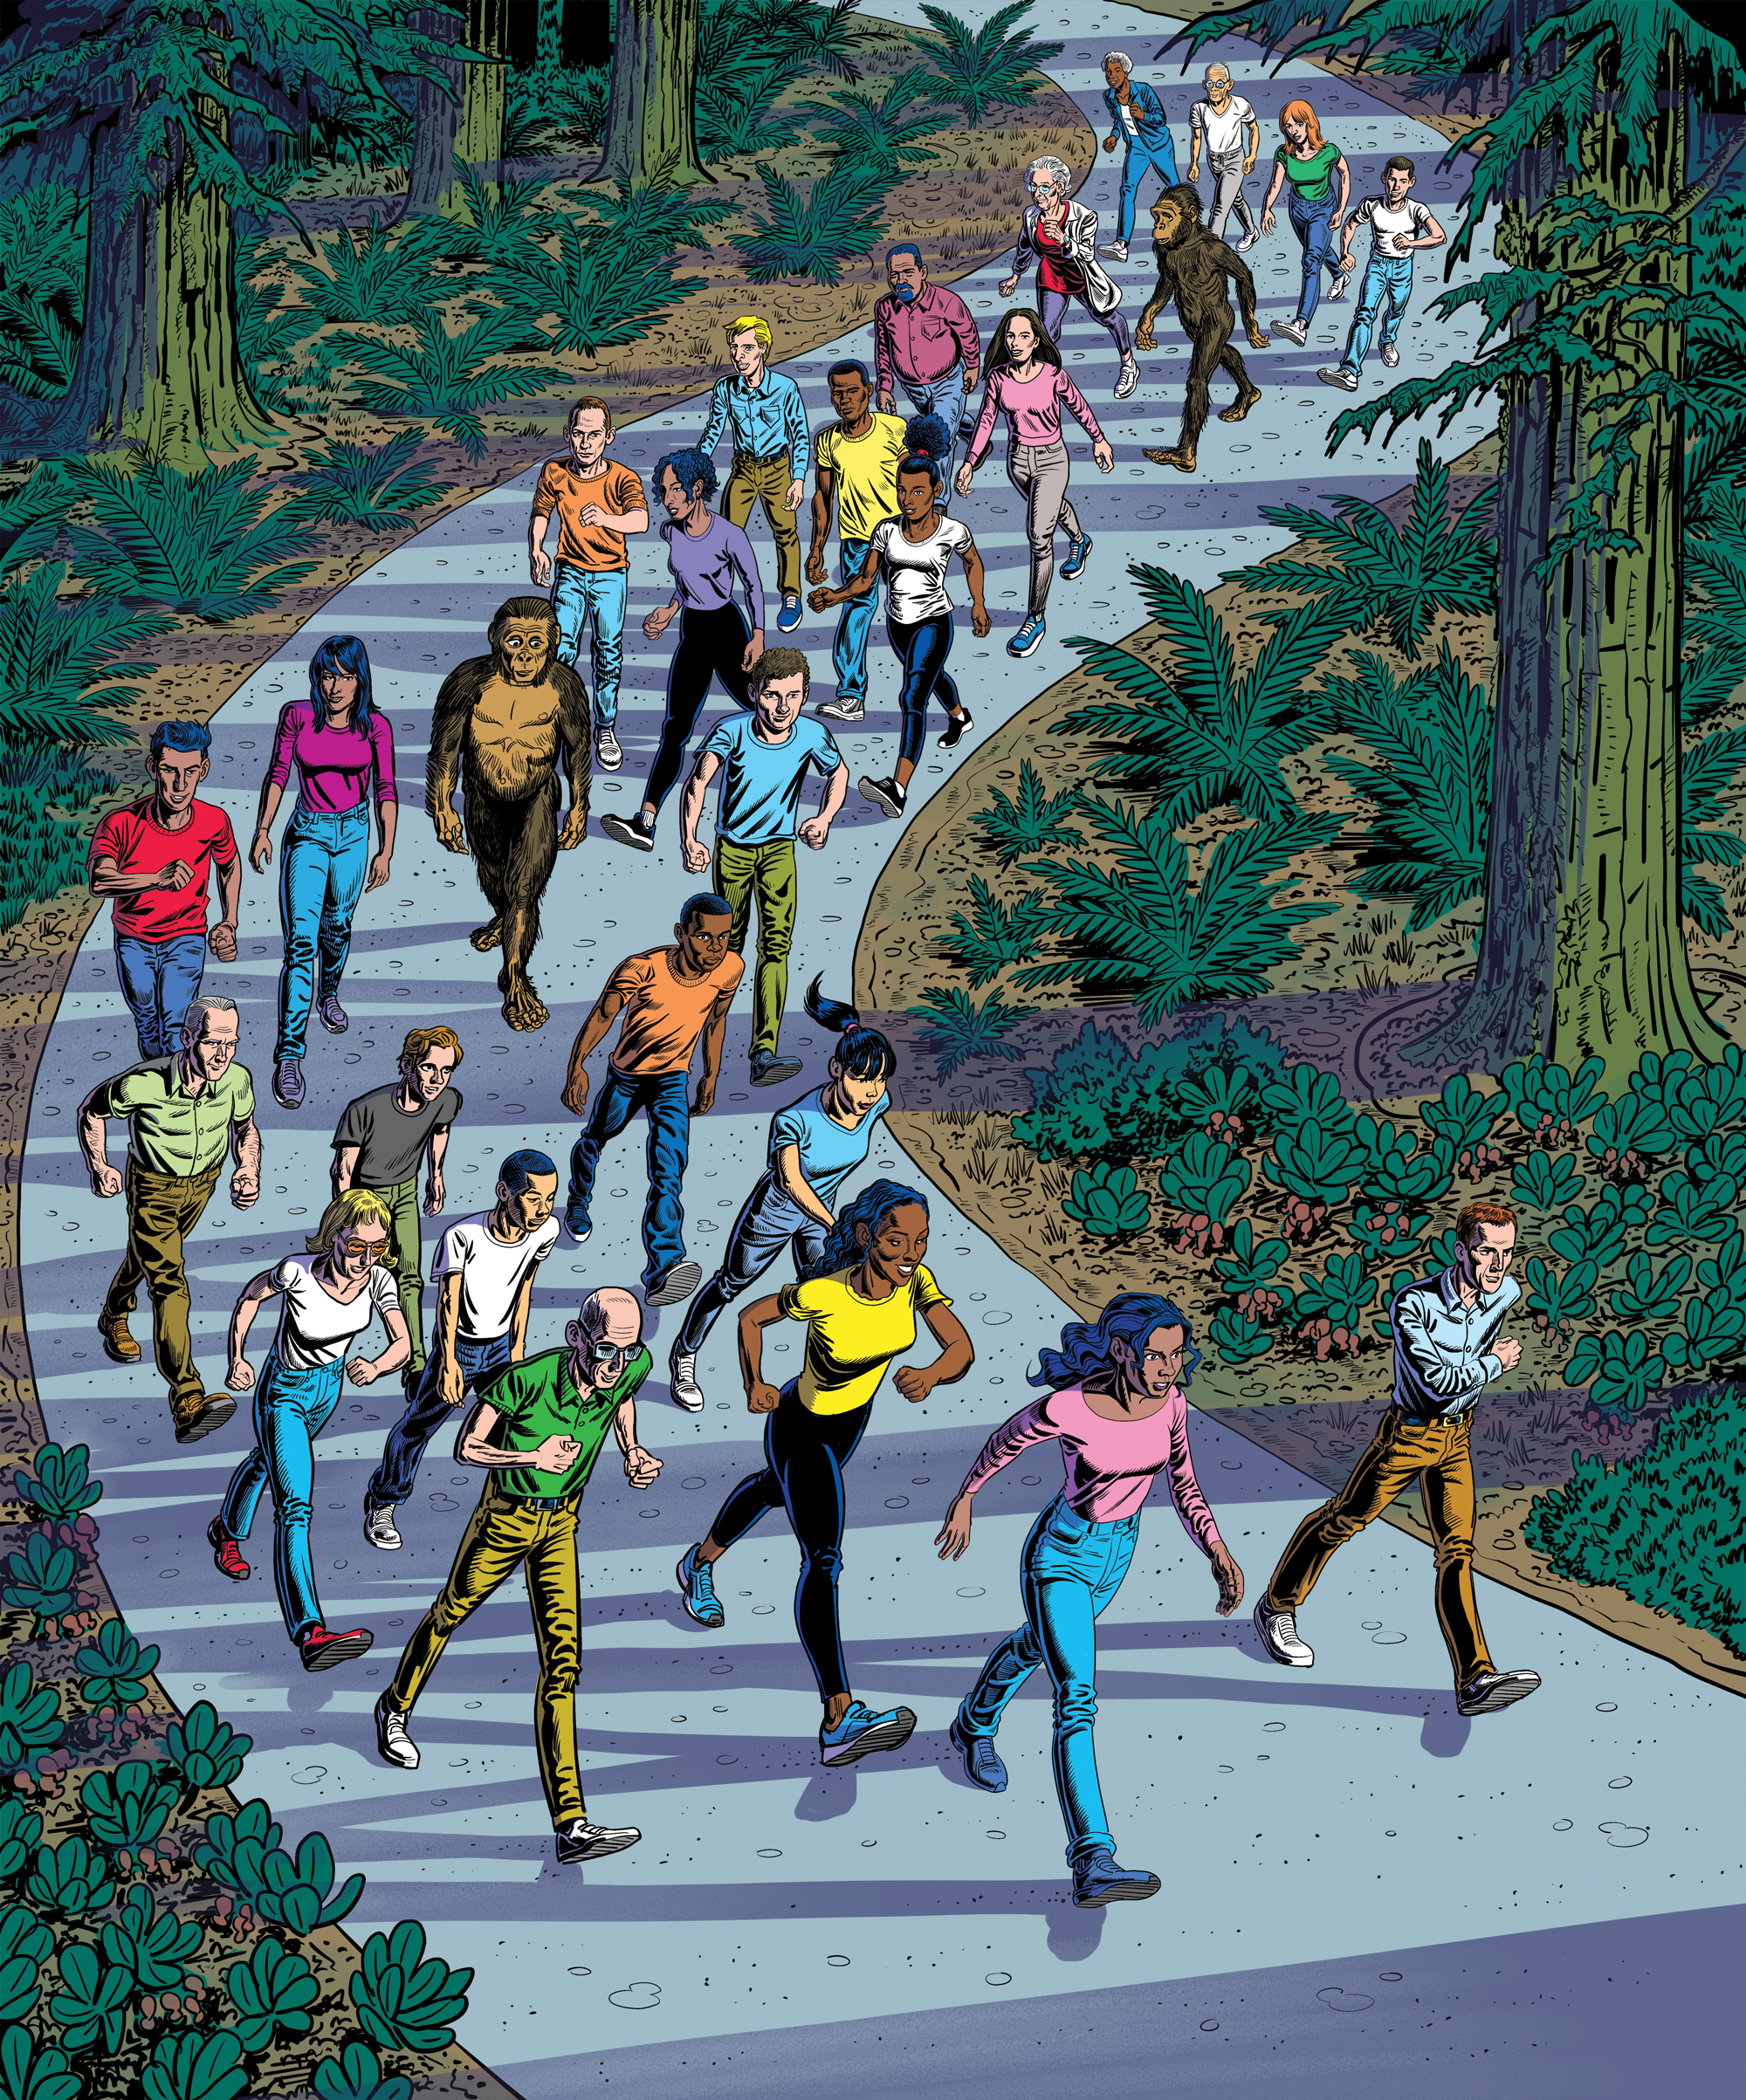 Illustratration of people walking on a trail outside within a forest setting